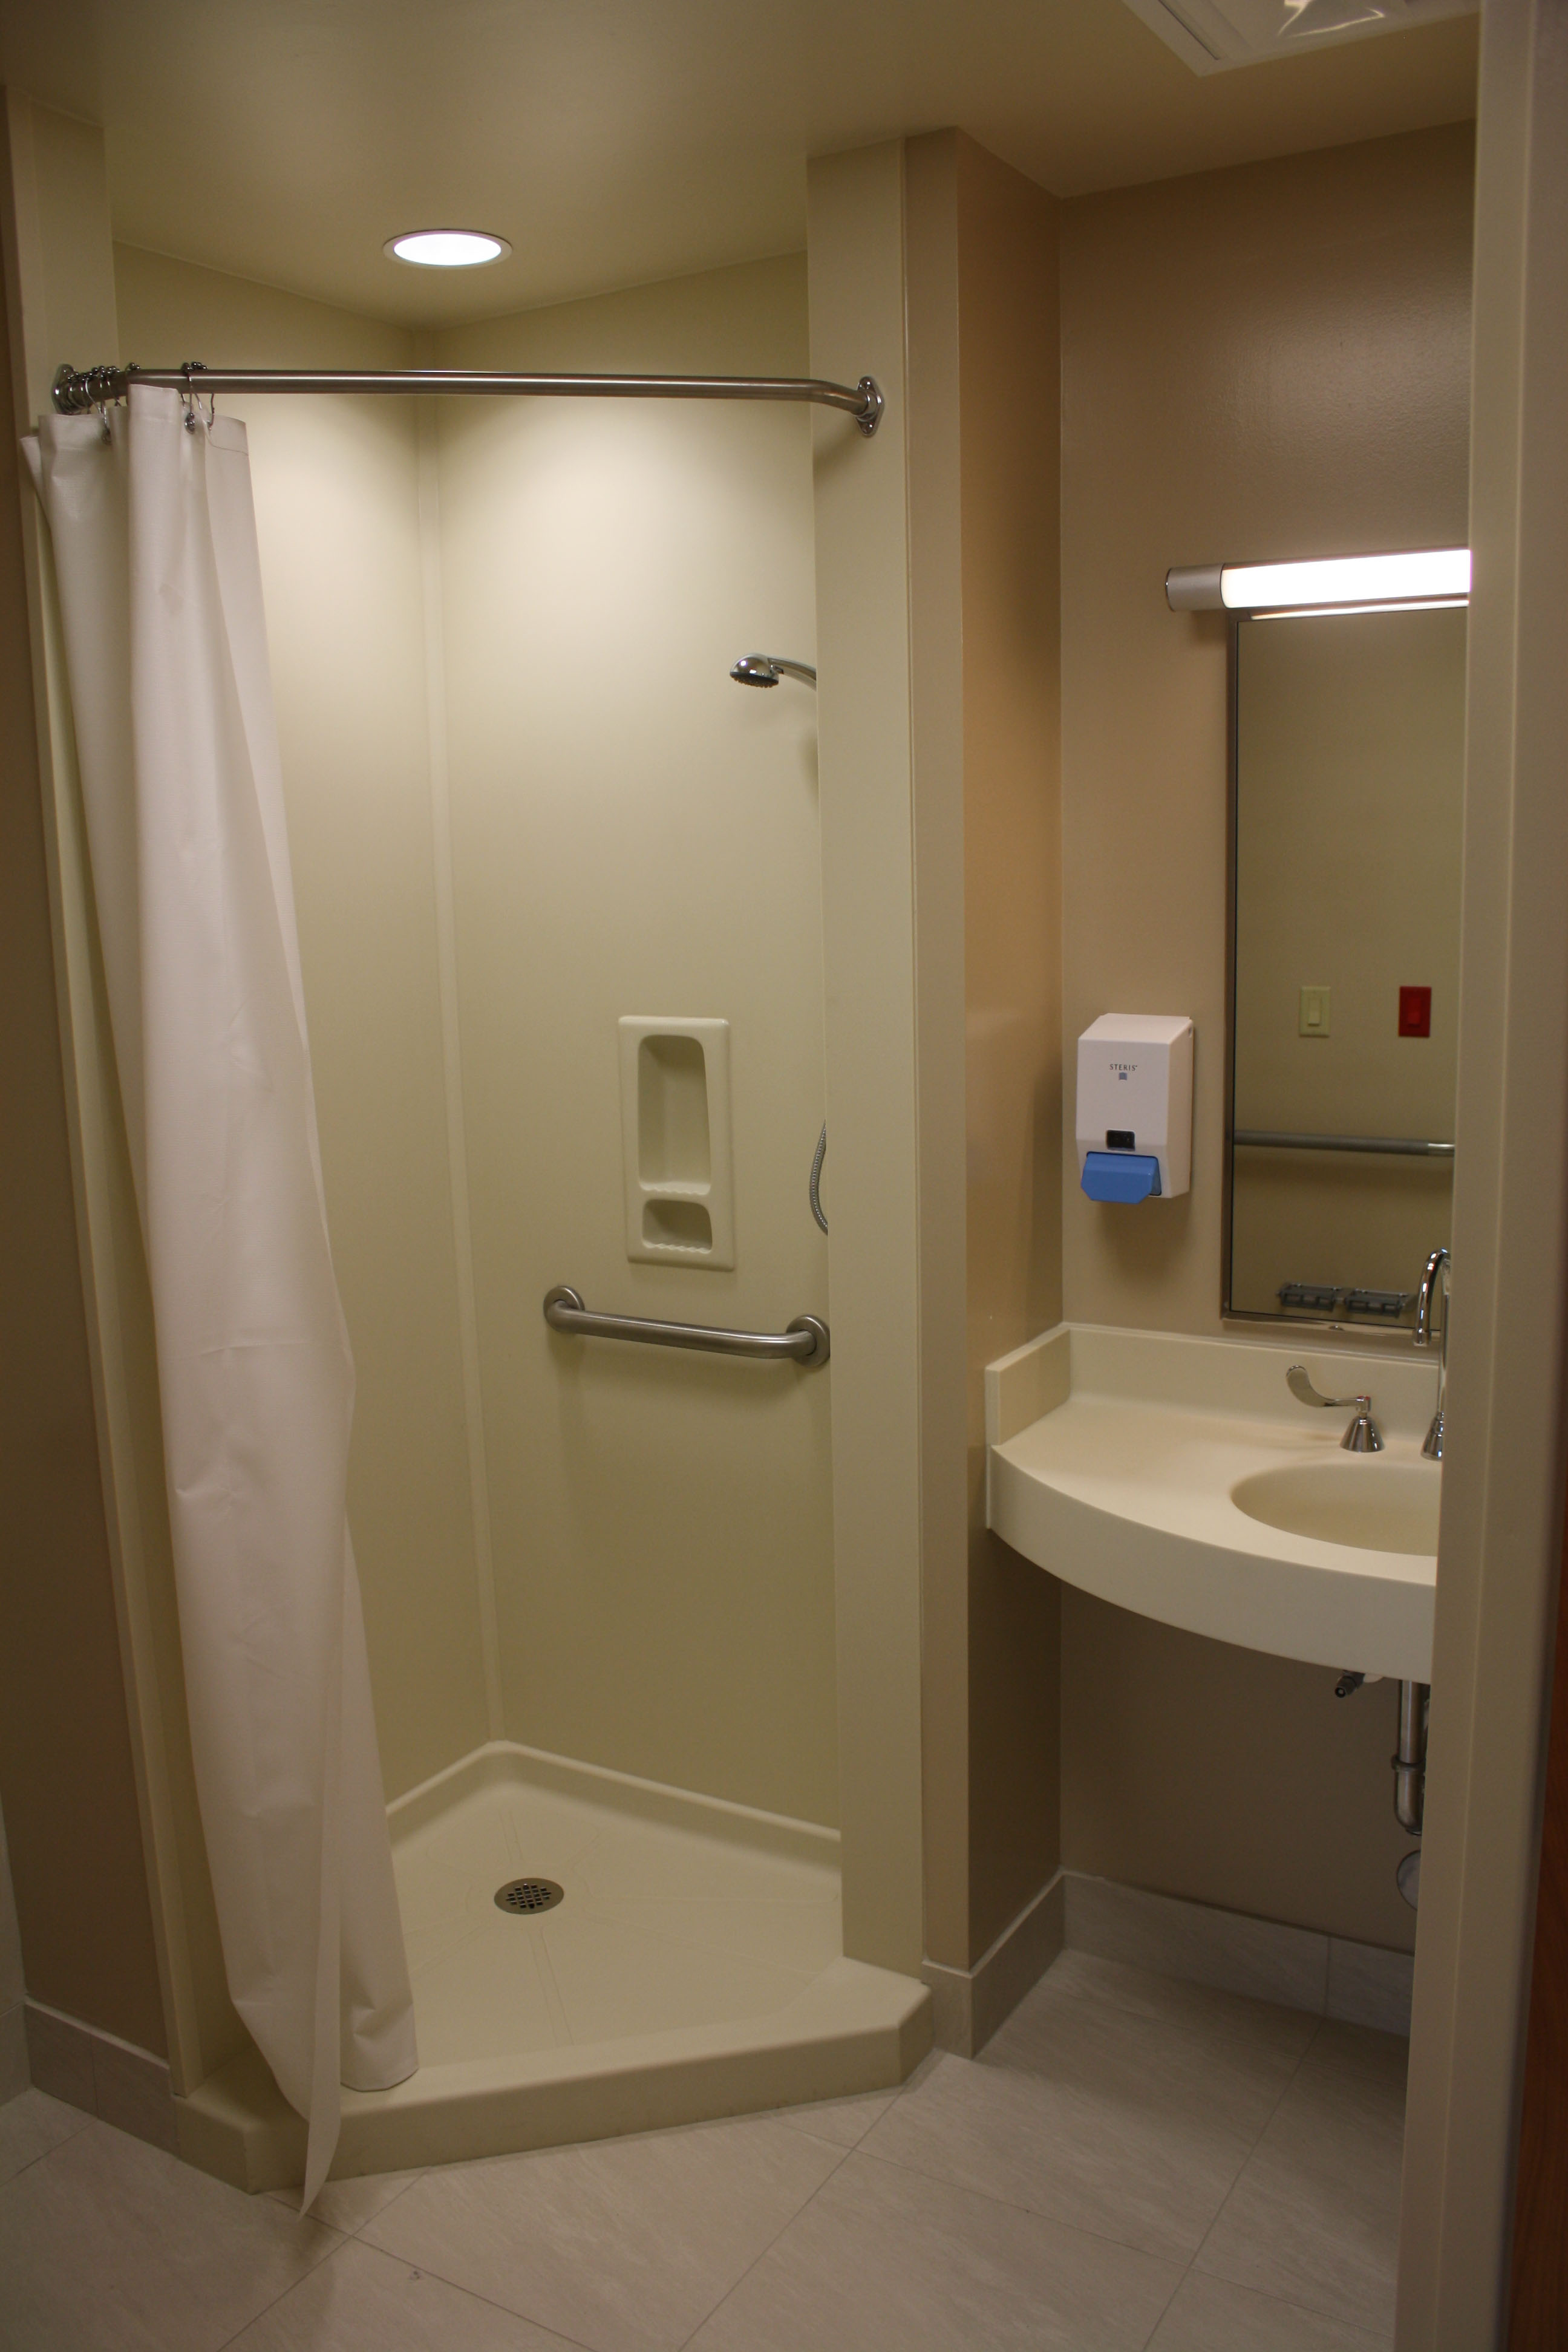 Avonite Surfaces® Bone 8010 shower wet wall panels in a hospital bathroom.